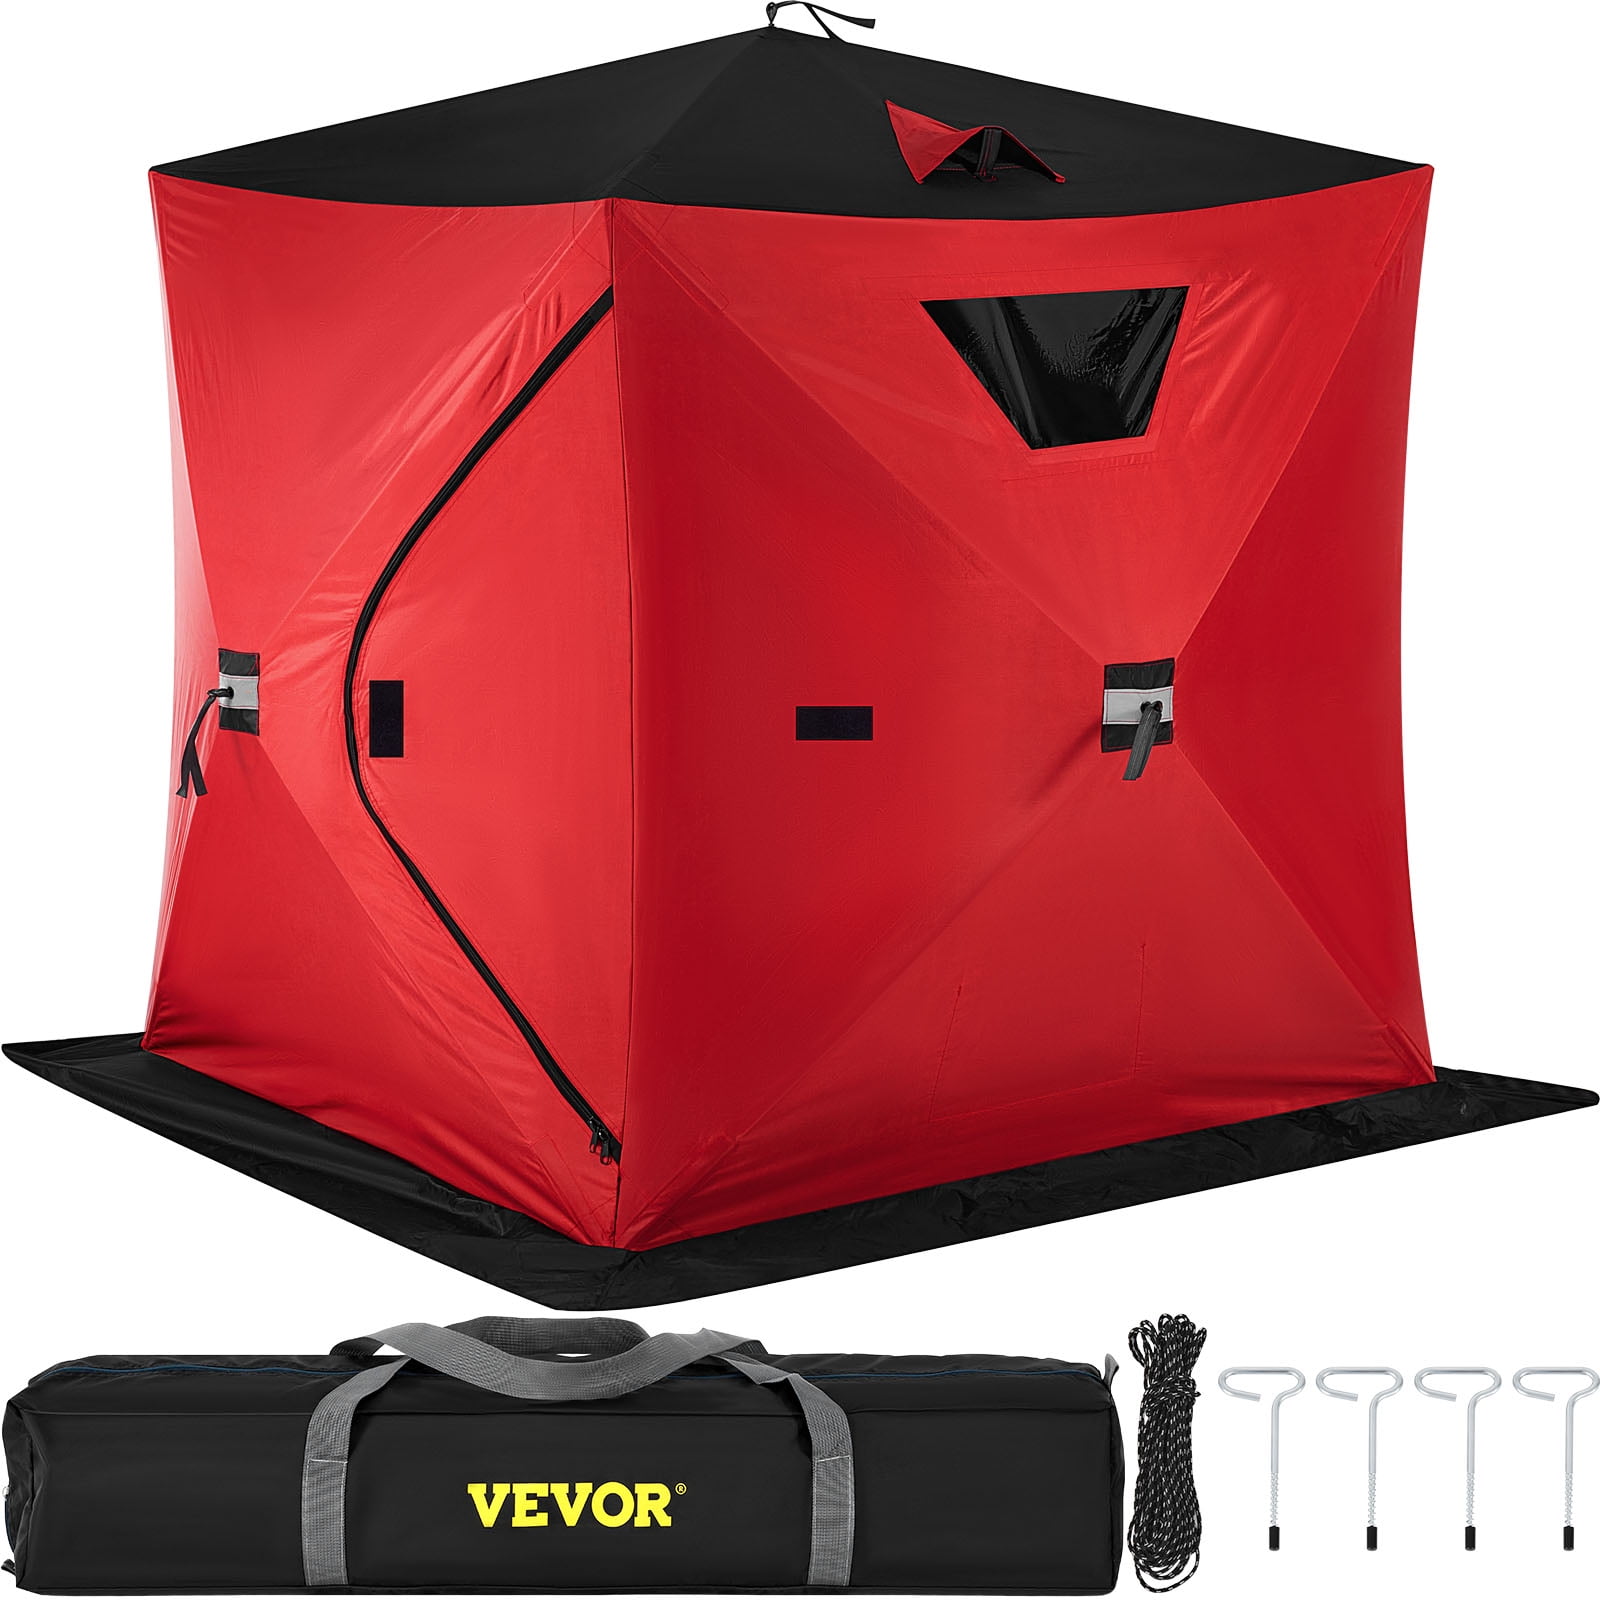 Outdoor Ice Fishing Pop-up Tent Portable Rainproof Oxford Camping Ice Fish Shelter for Outdoor Activities 